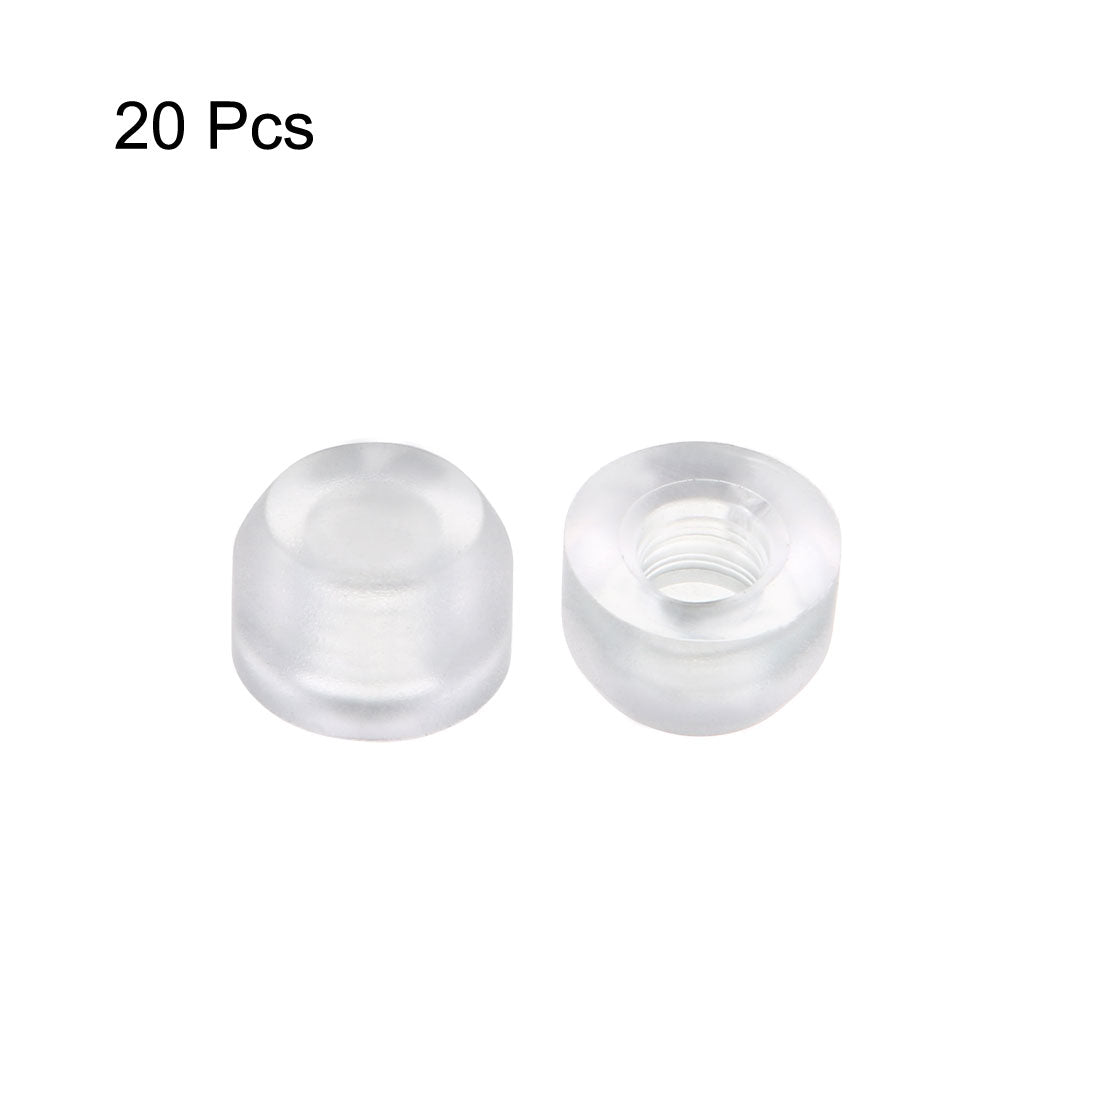 uxcell Uxcell 20pcs 3mm Hole Dia Silica-gel Pushbutton Tactile Switch Caps Cover Keycaps Protector Transparent for 6x6 Tact Switch